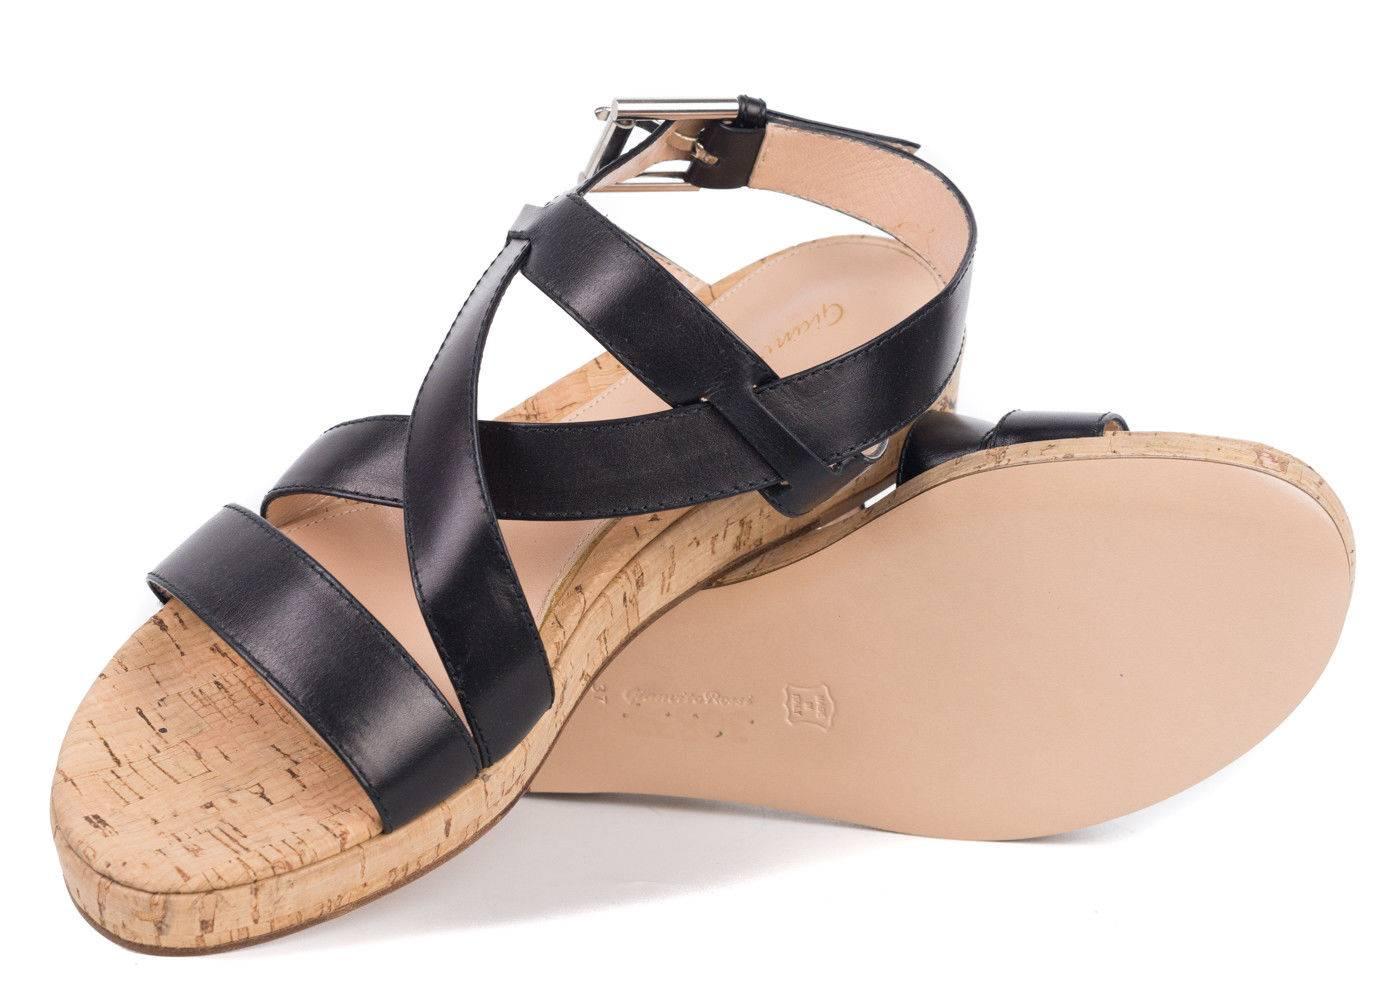 Gianvito Rossi Black Leather Buckled Strap Sandals In New Condition For Sale In Brooklyn, NY